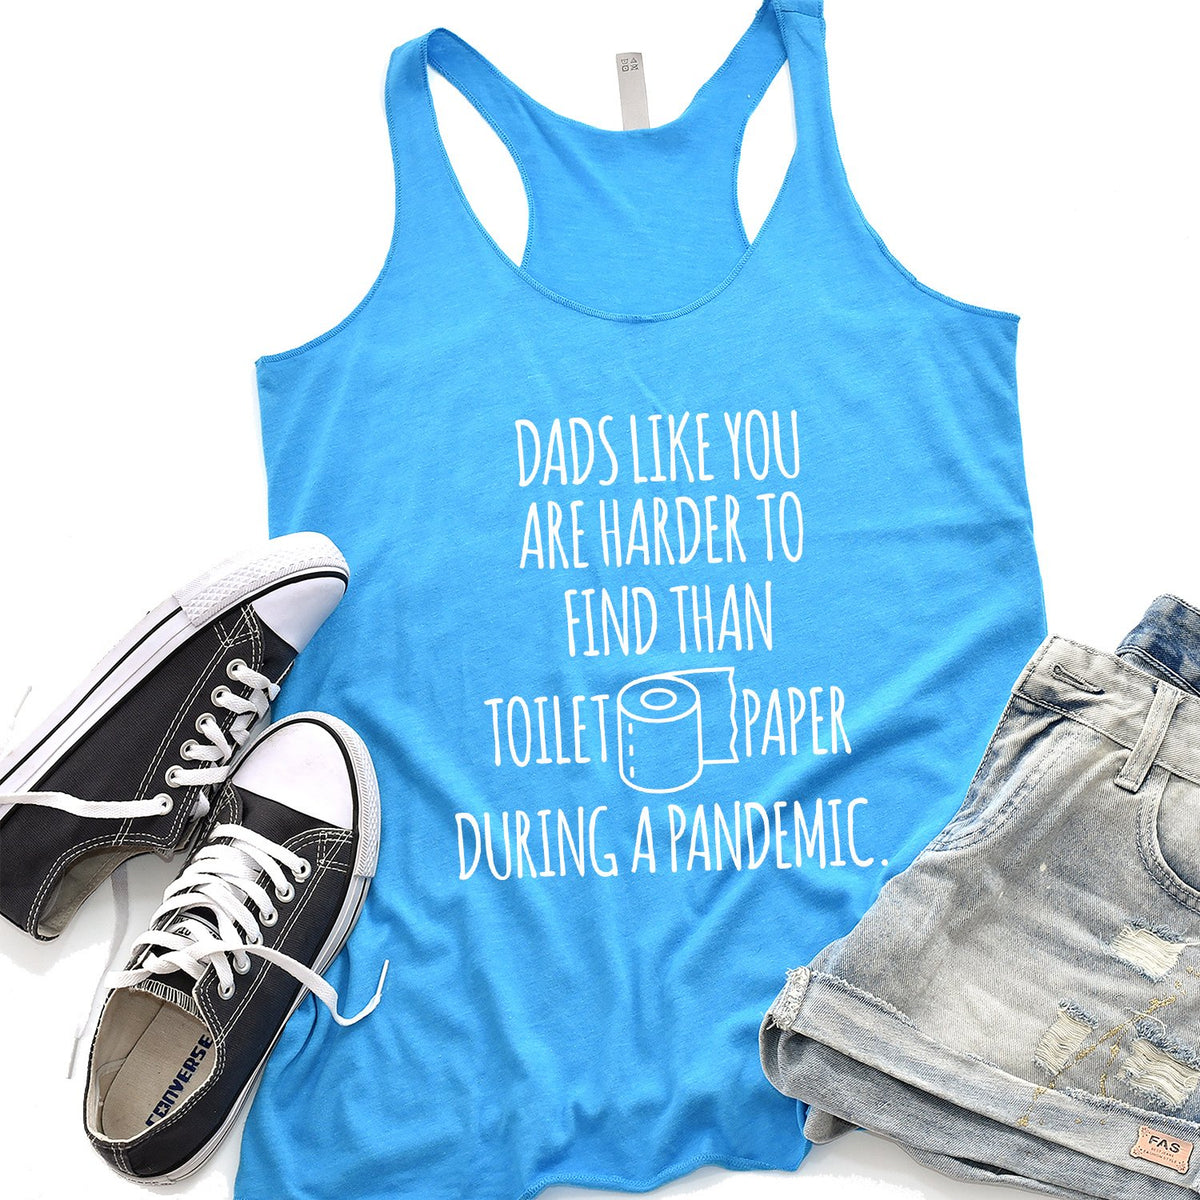 Dads Like You Are Harder to Find Than Toilet Paper During A Pandemic - Tank Top Racerback